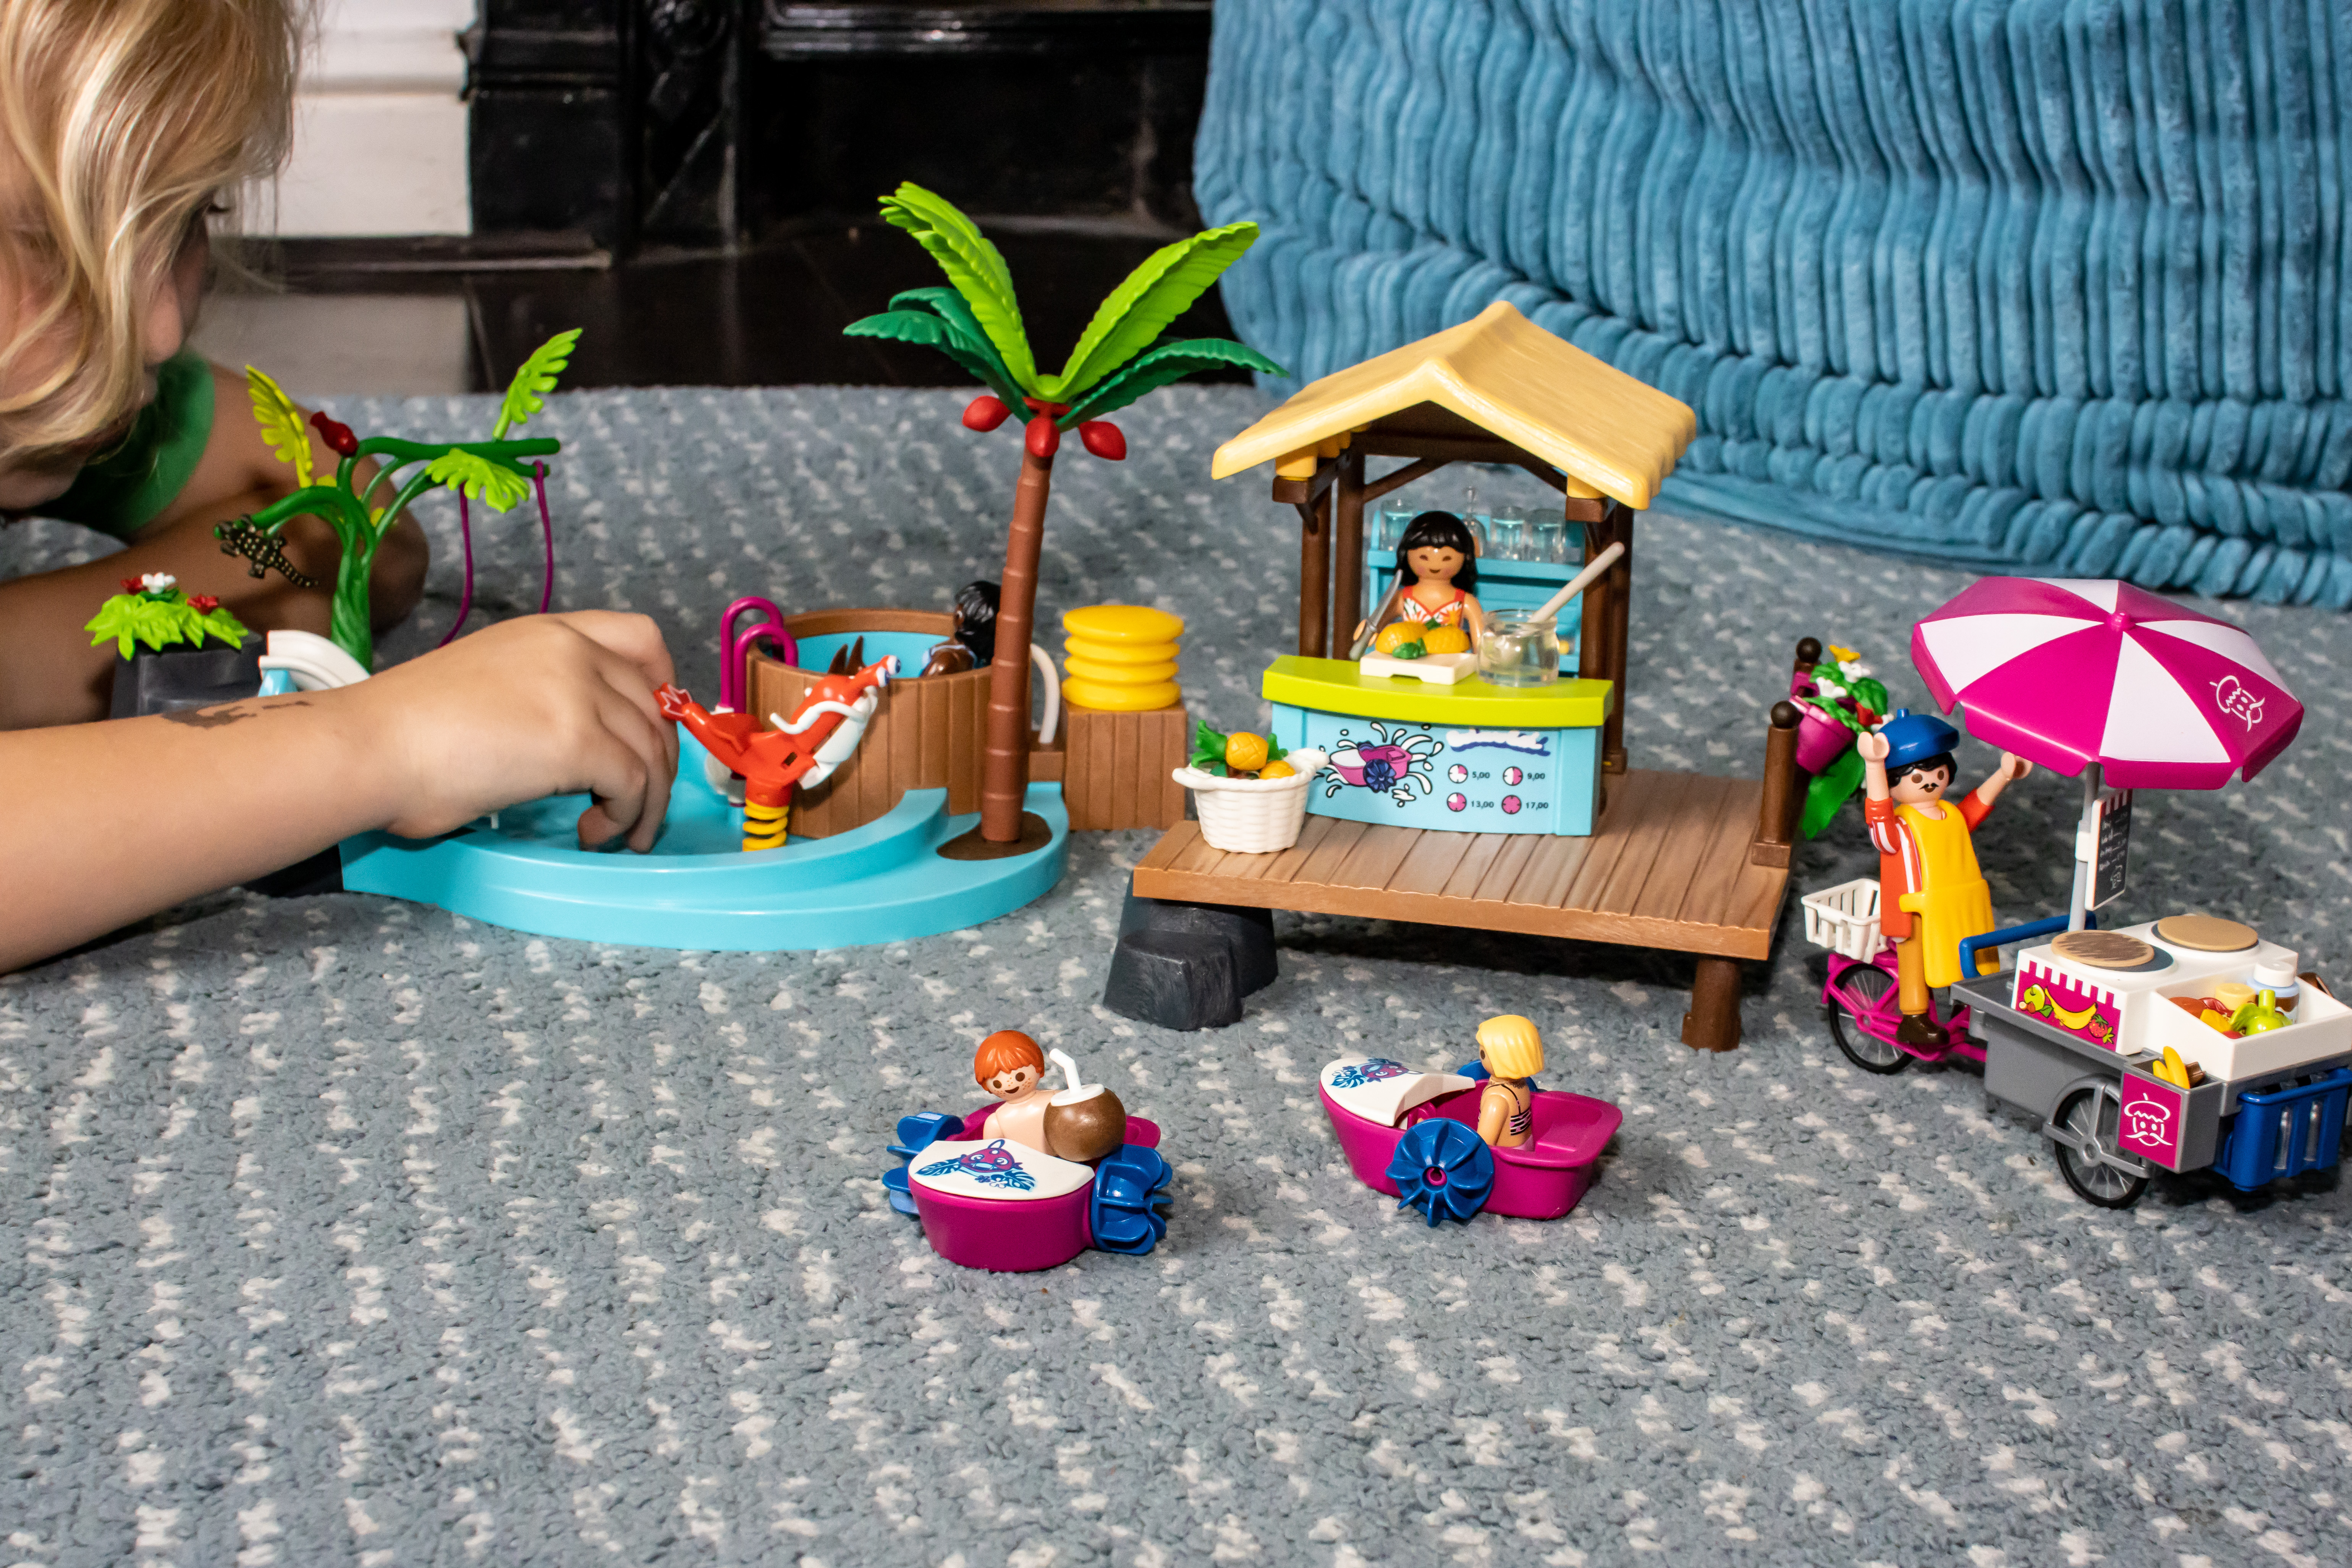 Review: New Playmobil Family Fun Summer Holiday Sets - Counting To Ten